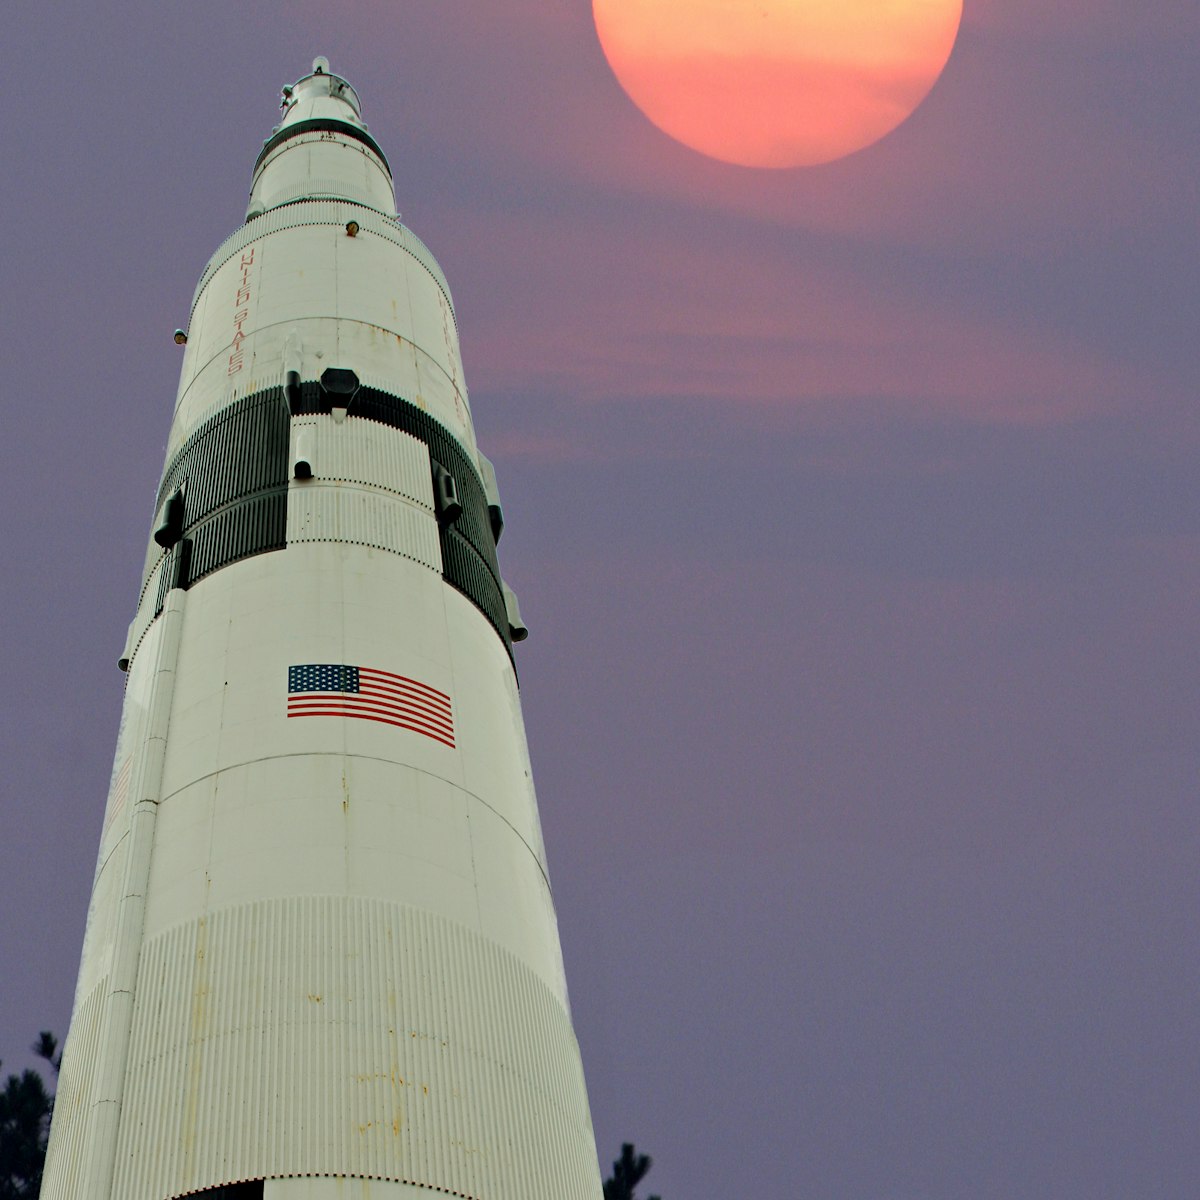 A Saturn 5 rocket appears to be aimming for the moon. The background was taken 10/22/04 at 5:30 pm CST. Taken with a Canon 10D, w/400mm lens set to 400mm. Tv 1/500, Av 8, ISO 400. White balance set to Flurescent. The shot was taken from my front porch in Harvest Al. The Sature 5 was taken 2/17/14 at 2:30 PM CST. at the Space and Rocket center in Huntsville Al. This shot was taken with a canon 7D, with a 28-135 lens set at 28mm. Tv 1/125, Av 6.3, exposure compensation plus 1 and ISO 100. Post process was on the background with PS elements 5, and the rocket with PS element 11 and Perfect photo suite 8.